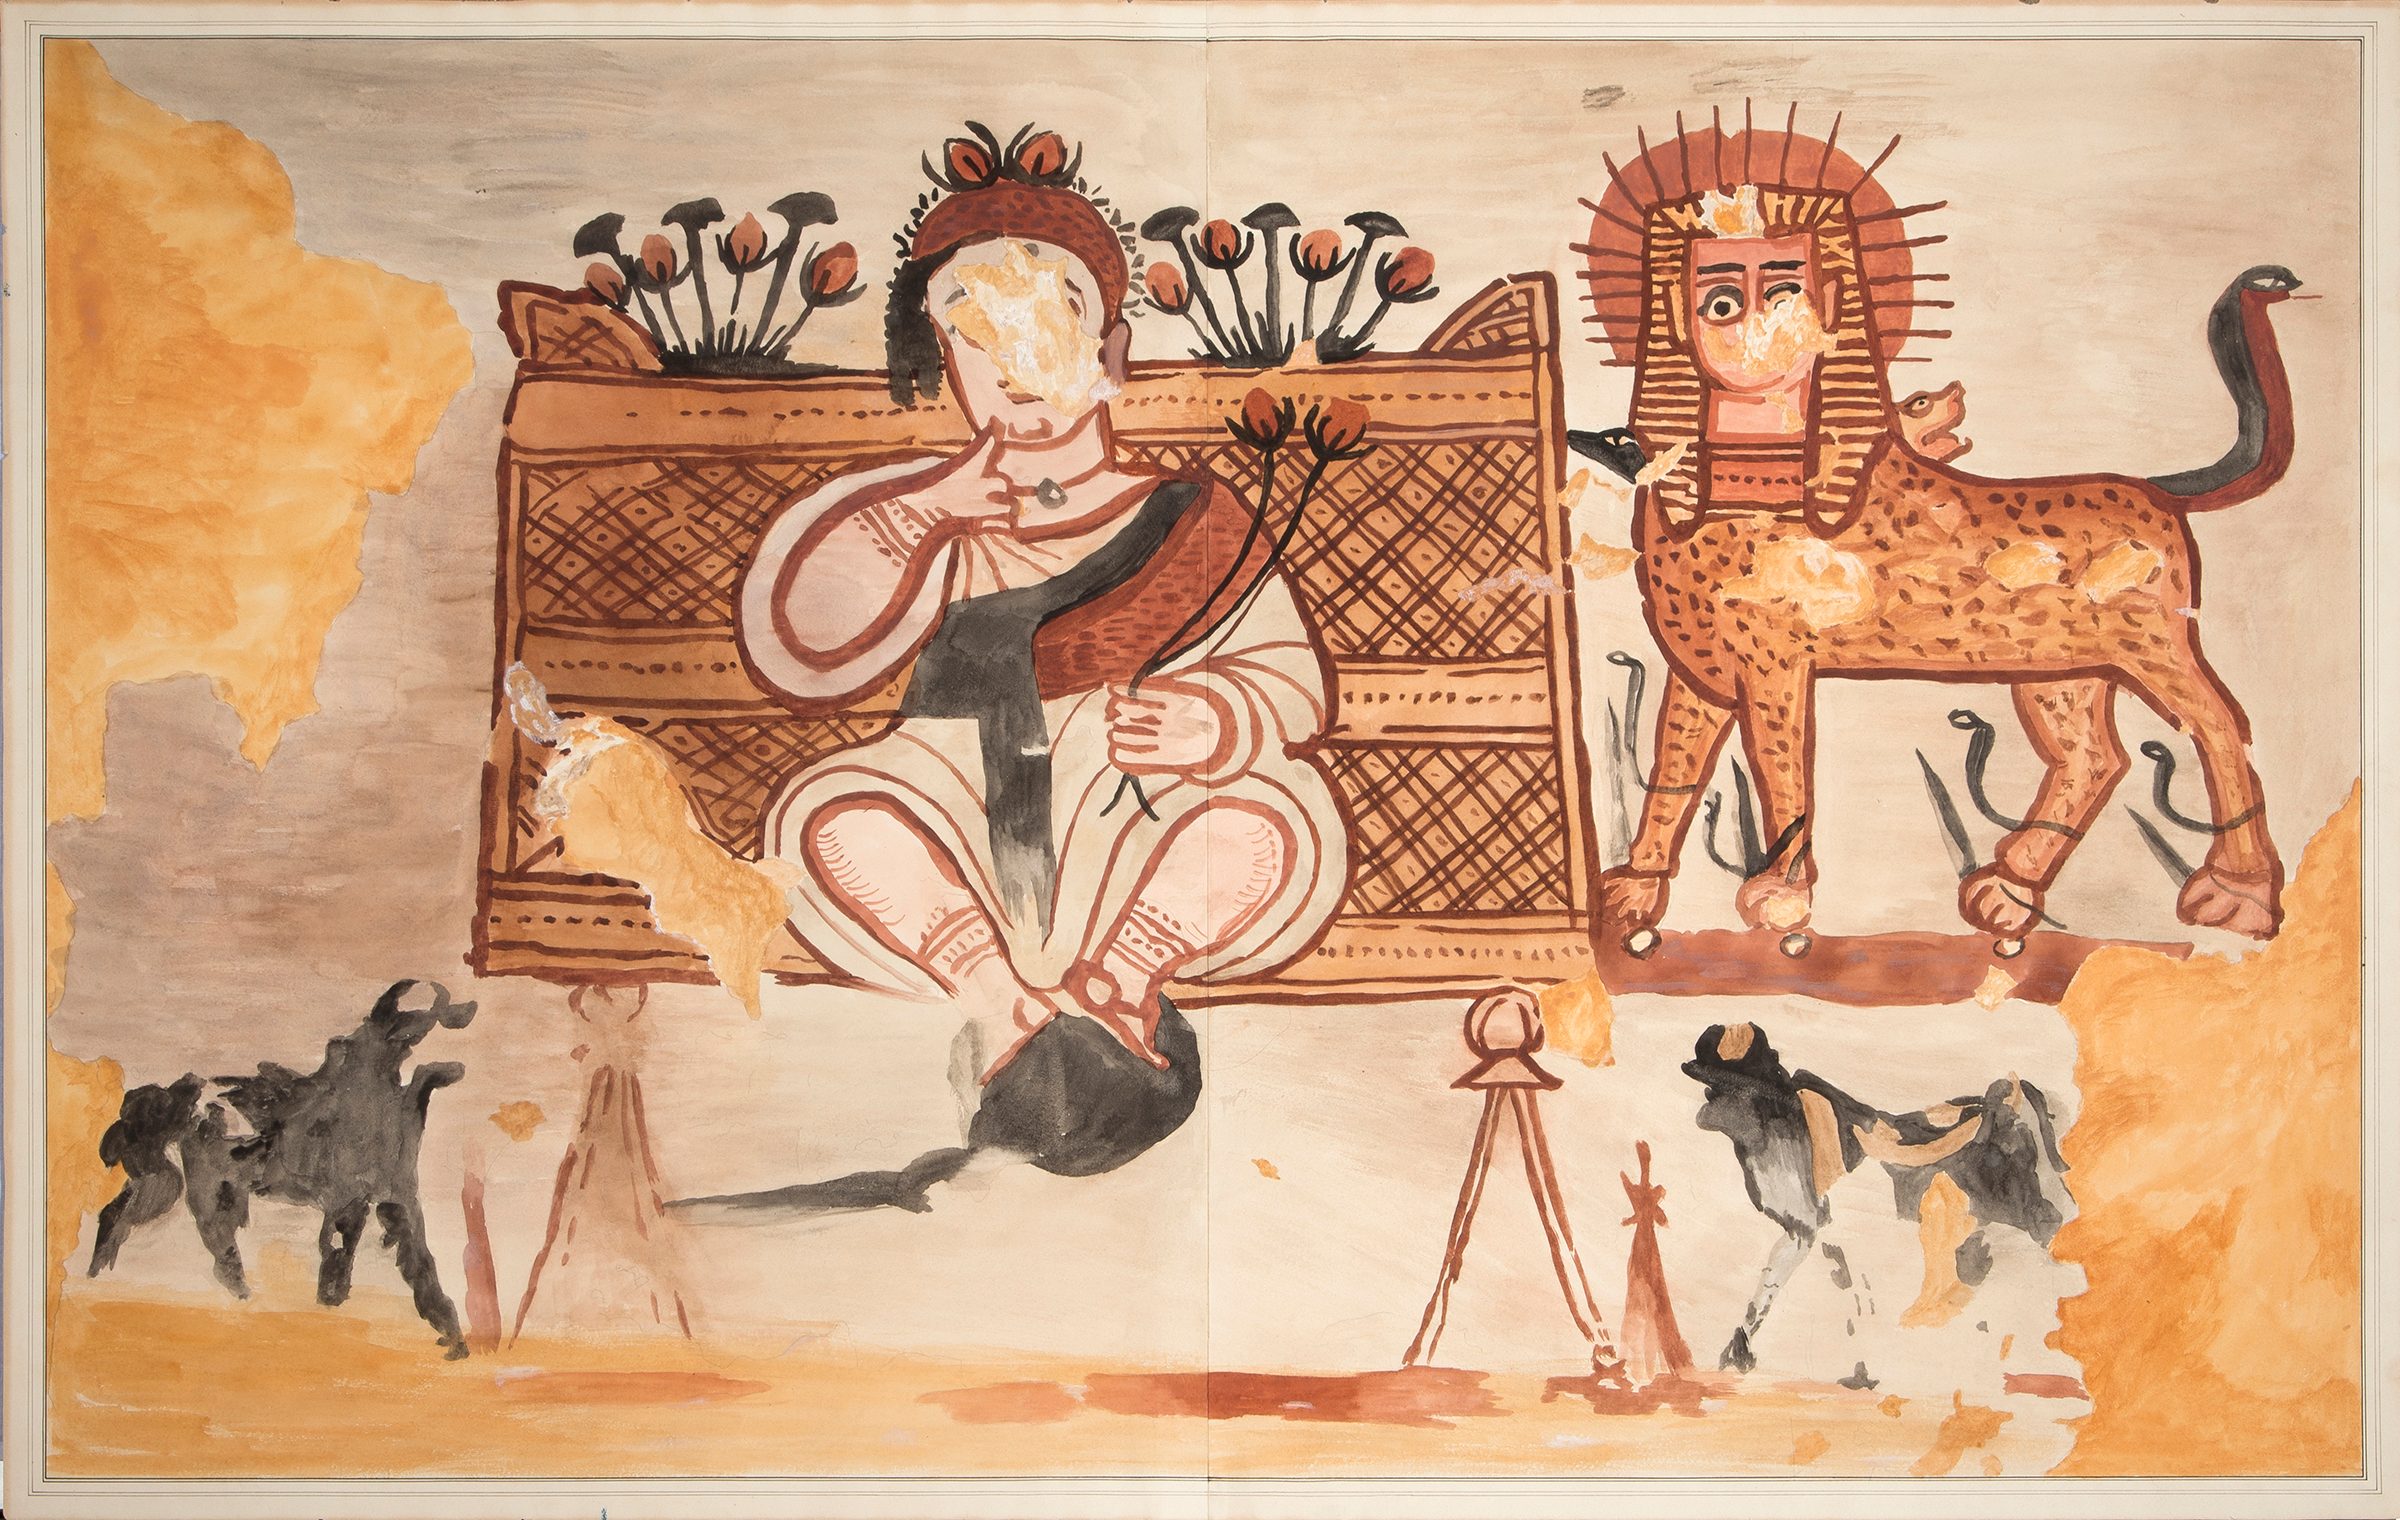 Watercolor painted with different shades of red, brown, and black. The deity Harpocrates sits near the center with a hand raised in a “silence” gesture. Images of bulls and a sphinx surround him. 